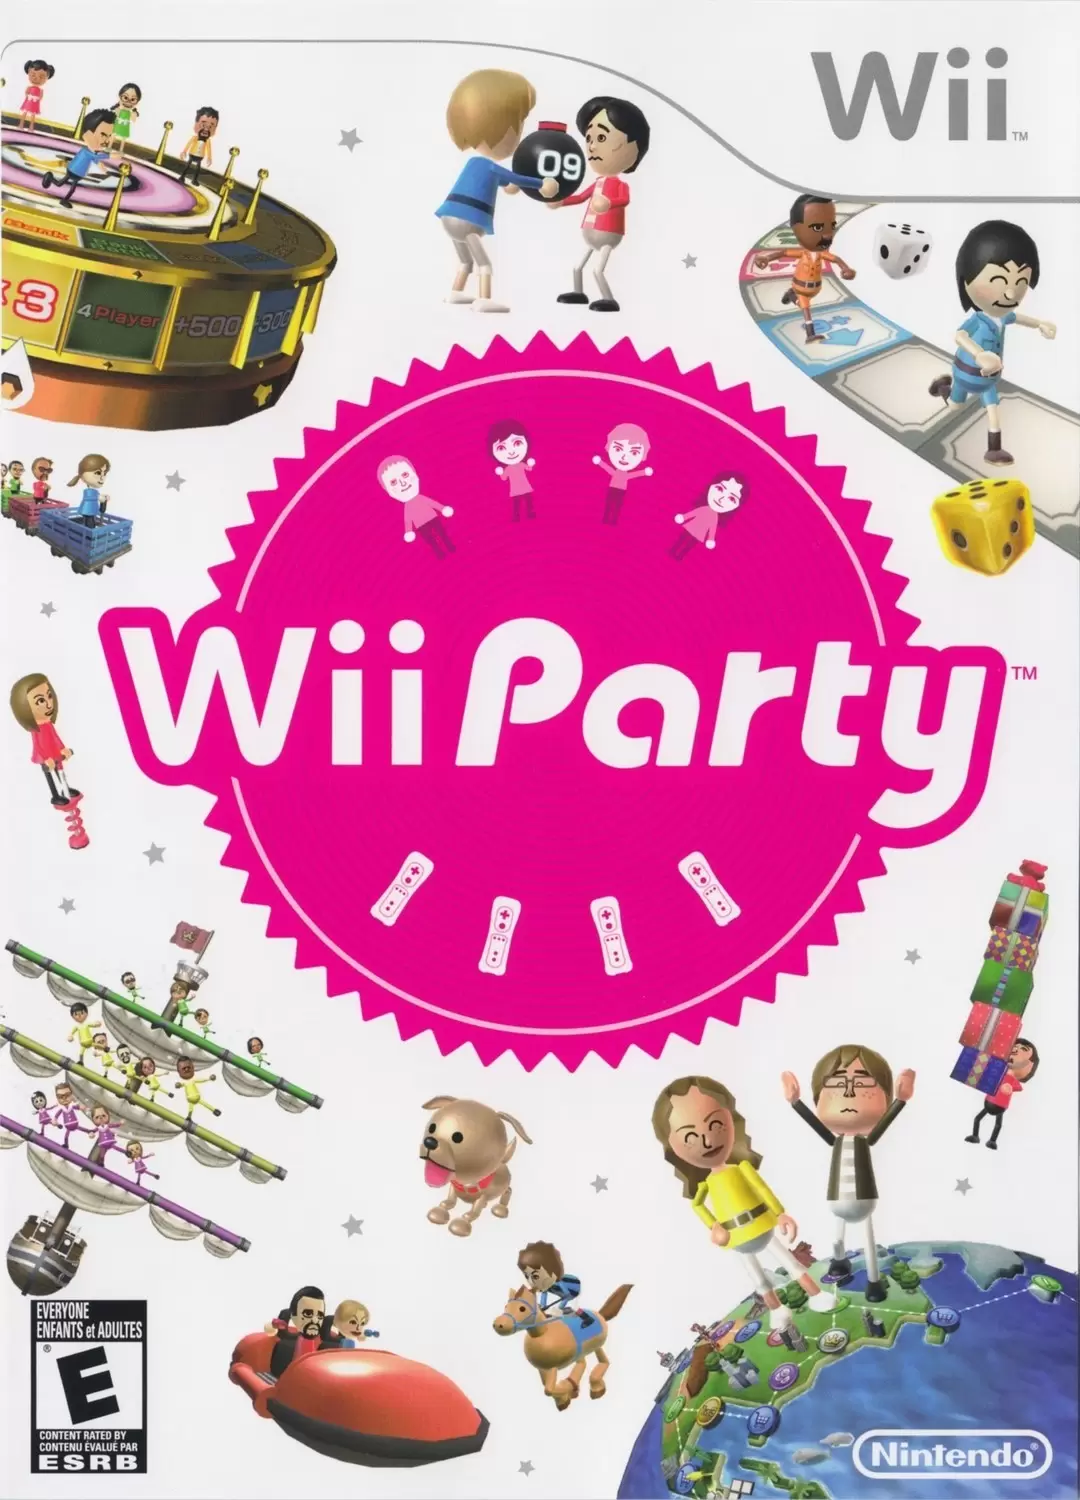 Nintendo Wii Games - Wii Party